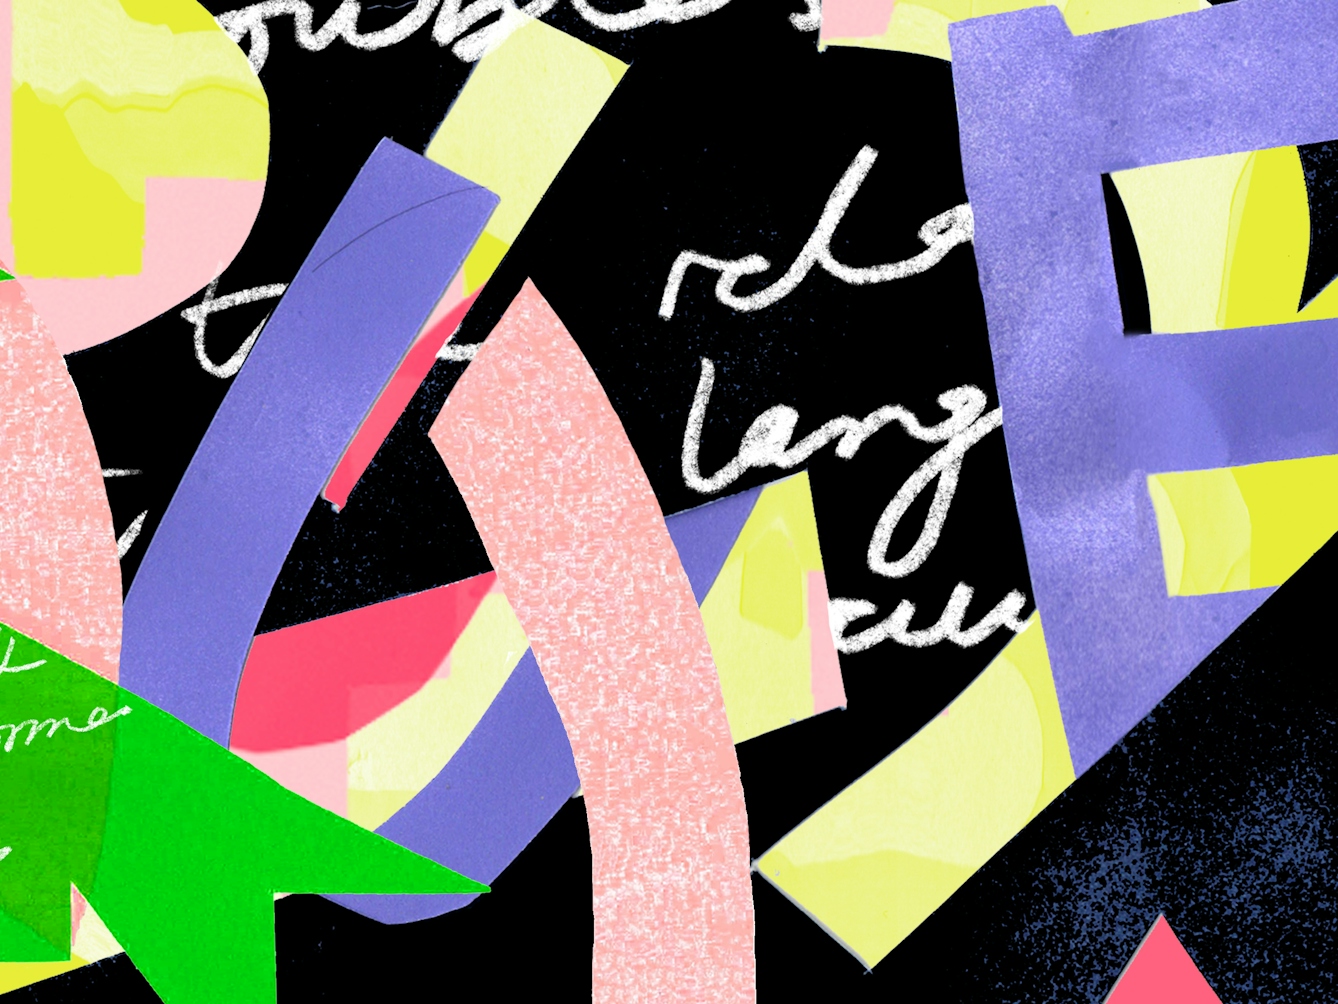 Detail from a larger colourful digital artwork created in a collage aesthetic. The artwork is made up of fragments of letters, geometric shapes and snippets of handwritten, joined up text. The hues are pinks, greens, purples and yellows, set against a dark black and blue background. The letters are sometimes the right way up and sometimes at an angle. Other graphic elements overlap them, obscuring parts. The handwritten text is not easy to read, but flows through the background. The overall feel is of graphic fragmentation with communication at its centre.